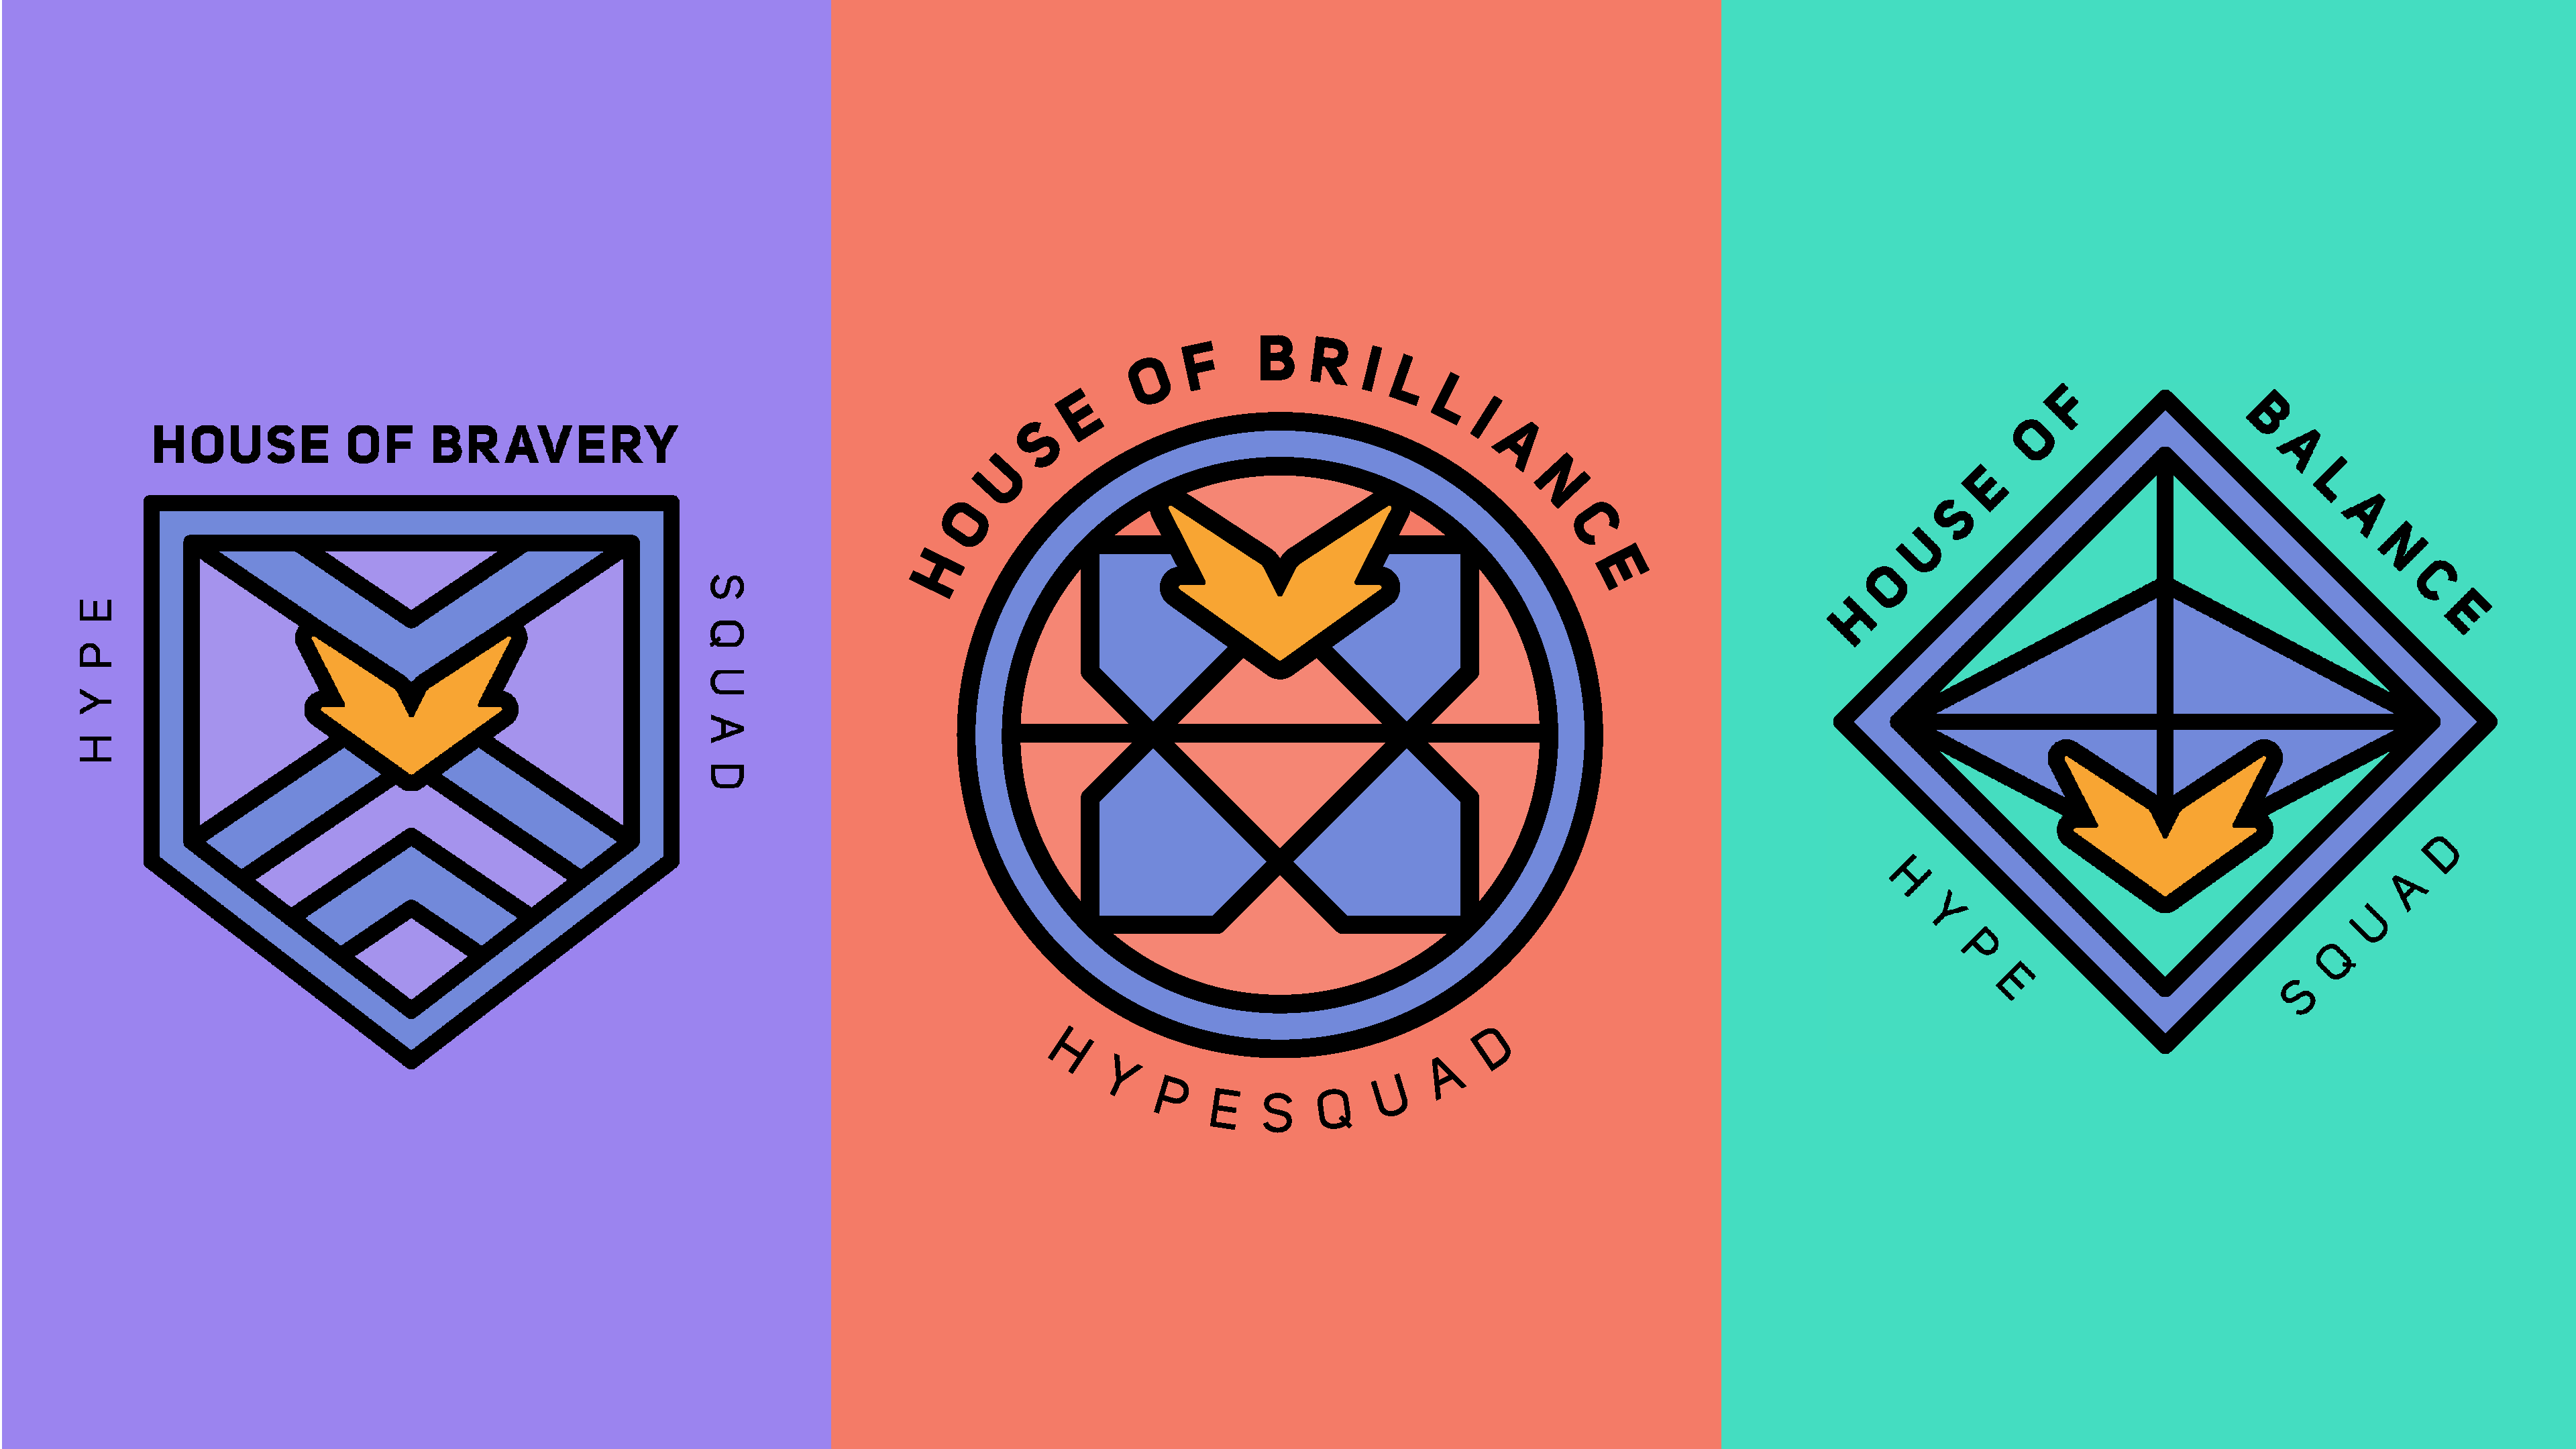 Made a few wallpaper / colored versions of the discord hypesquad